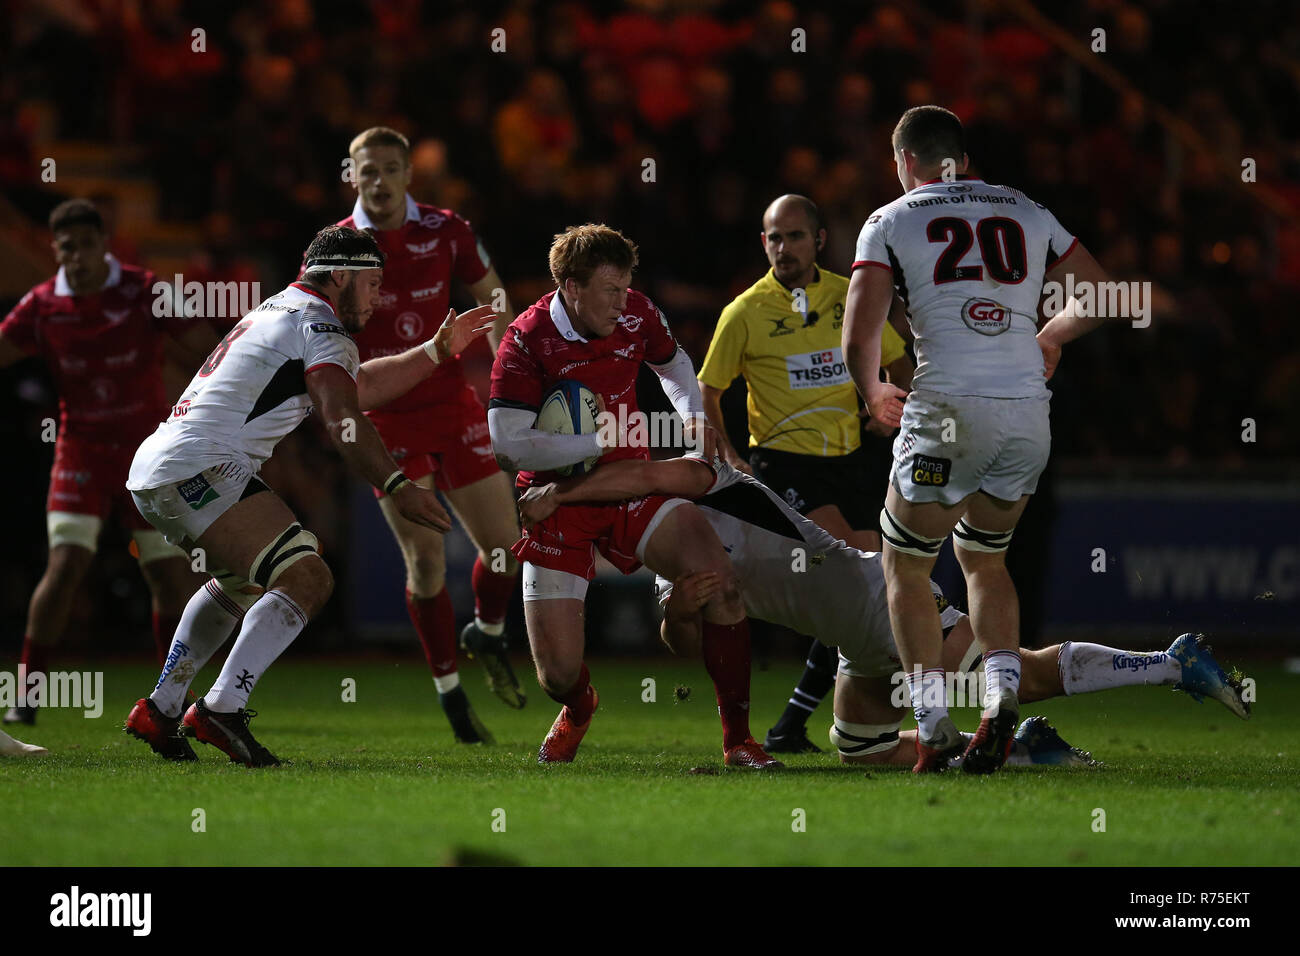 Llanelli, UK. 07th Dec, 2018. Rhys Patchell of the Scarlets Credit: is tackled.Scarlets v Ulster rugby, Heineken European Champions Cup, pool 4 match at Parc y Scarlets in Llanelli, South Wales on Friday 7th December 2018. picture by Andrew Orchard/Andrew Orchard sports photography/Alamy Live News Stock Photo